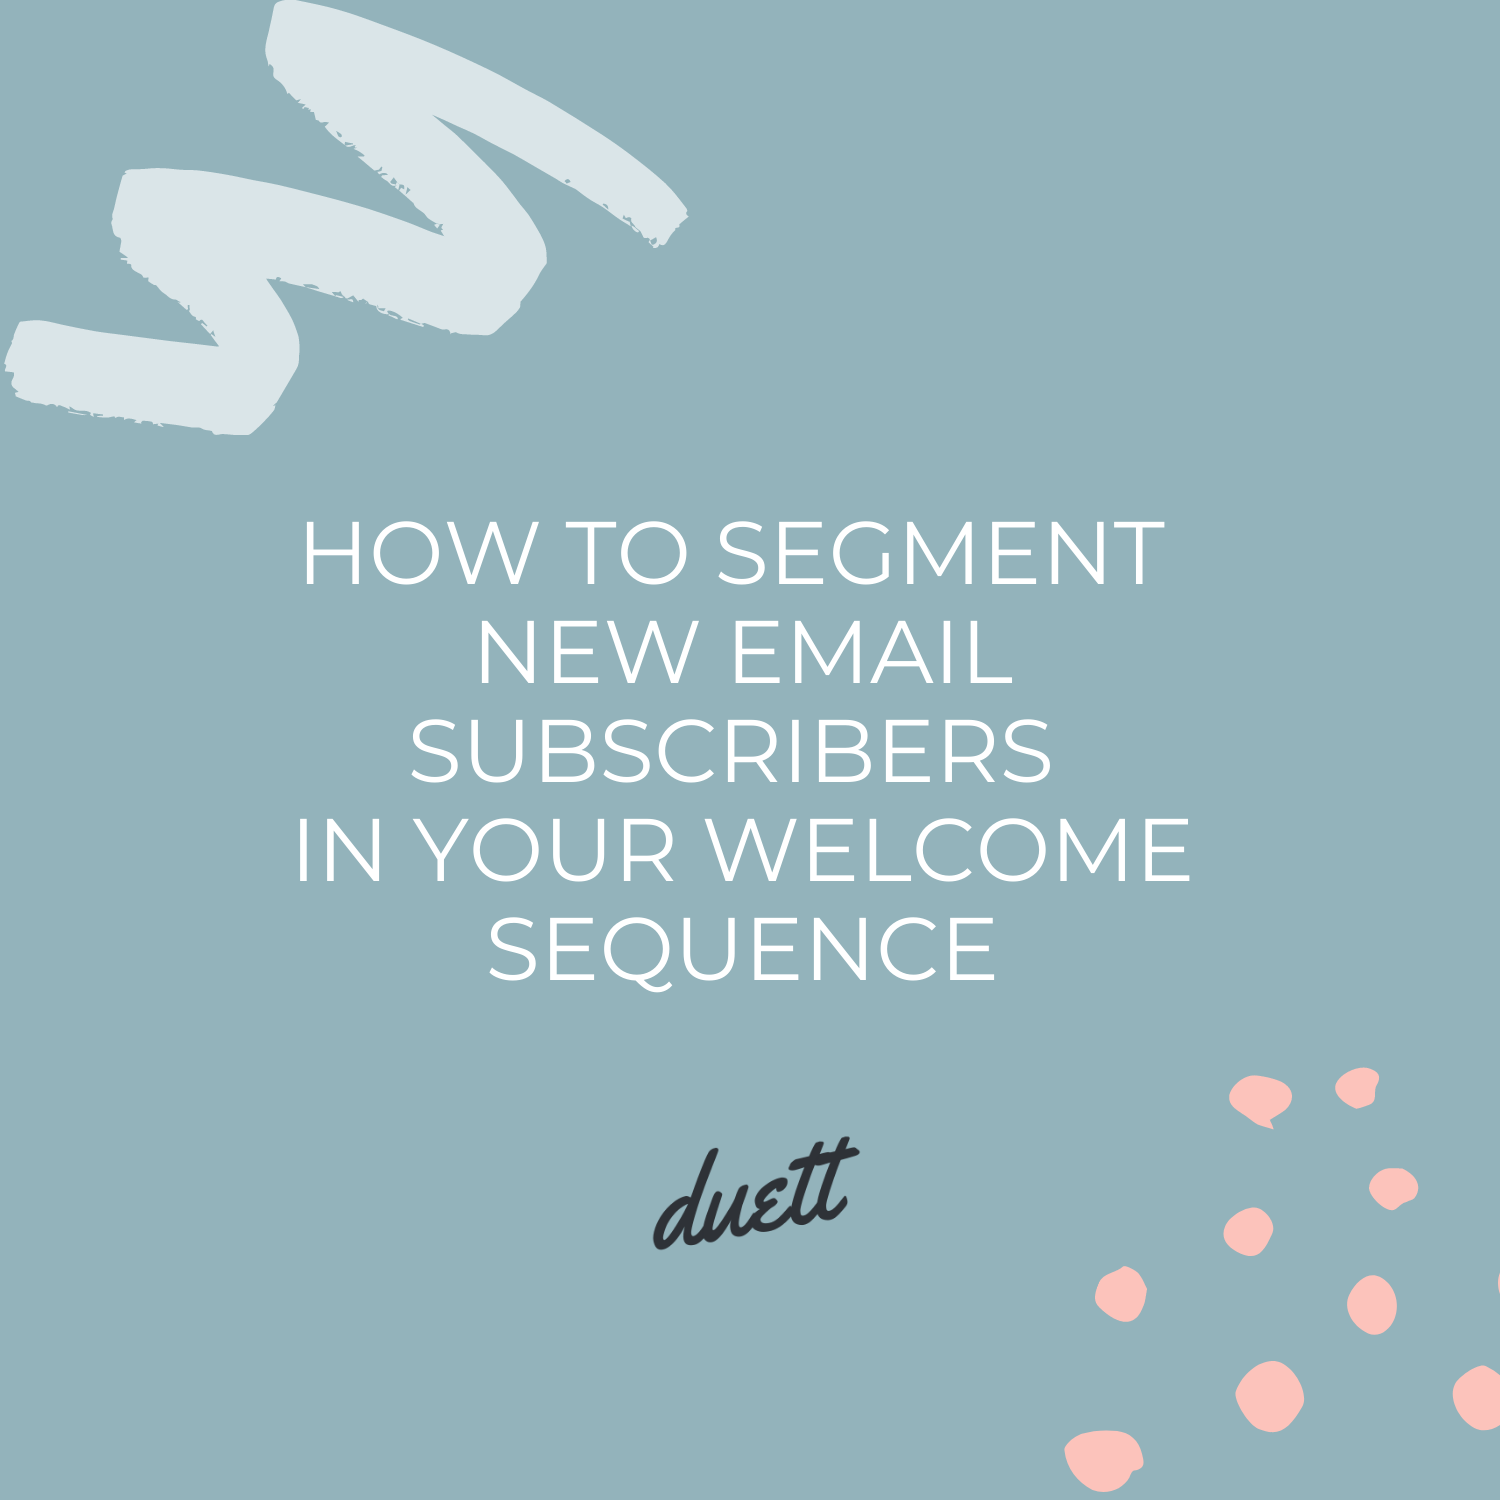 How to Segment New Email Subscribers in Your Welcome Sequence